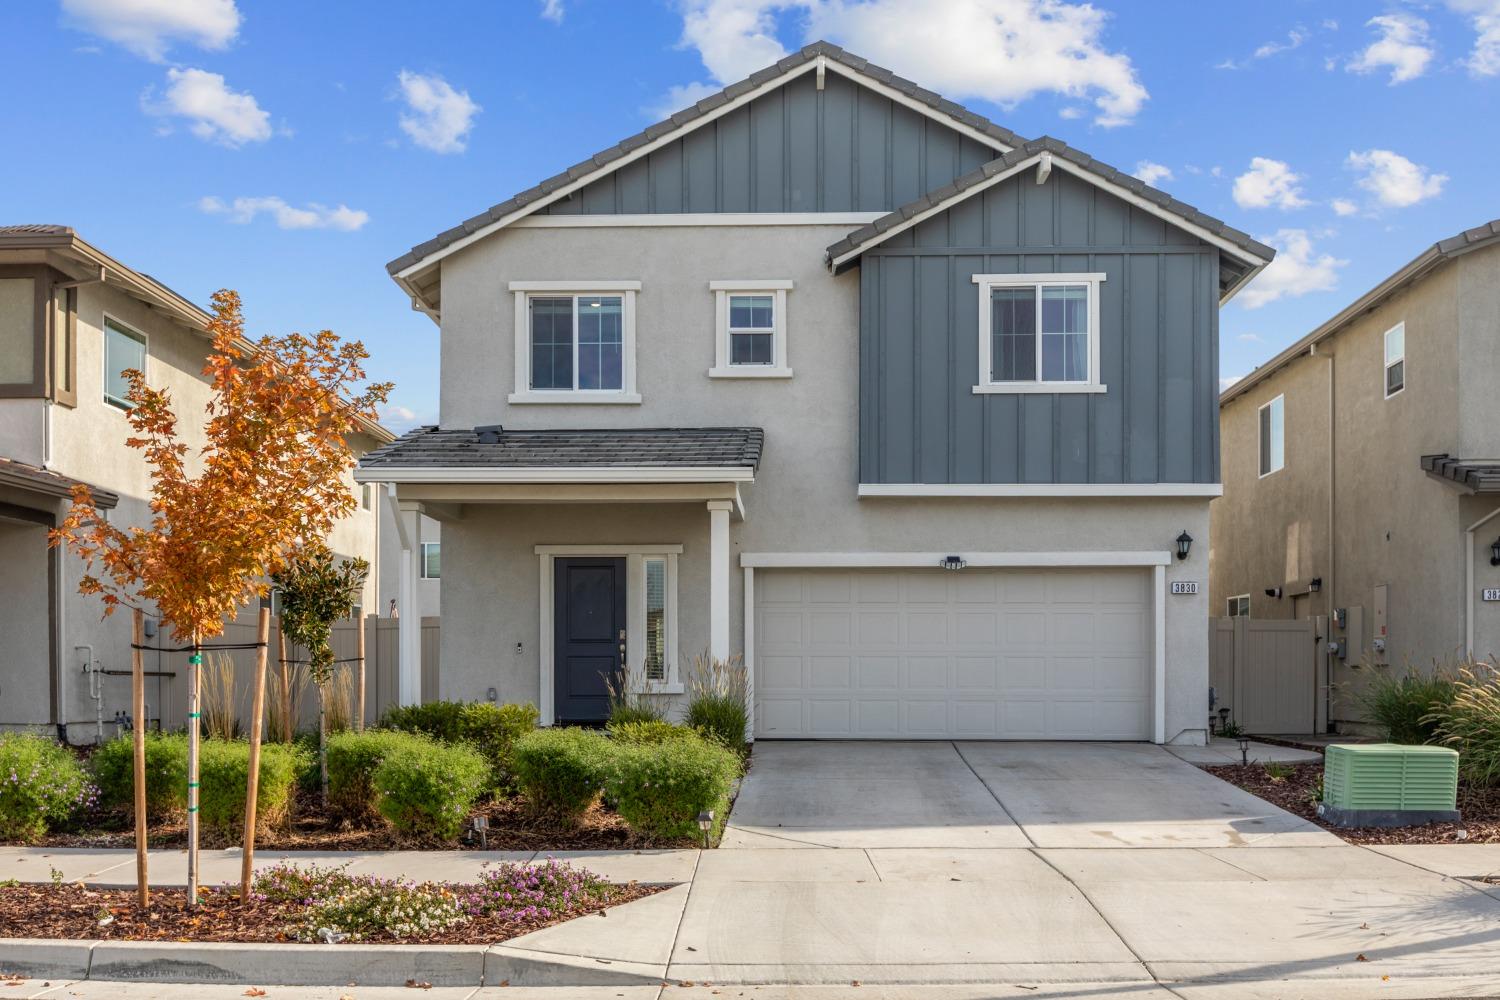 Beautiful 2021 built home located in a thru street in the desirable Parkebridge community in Natomas